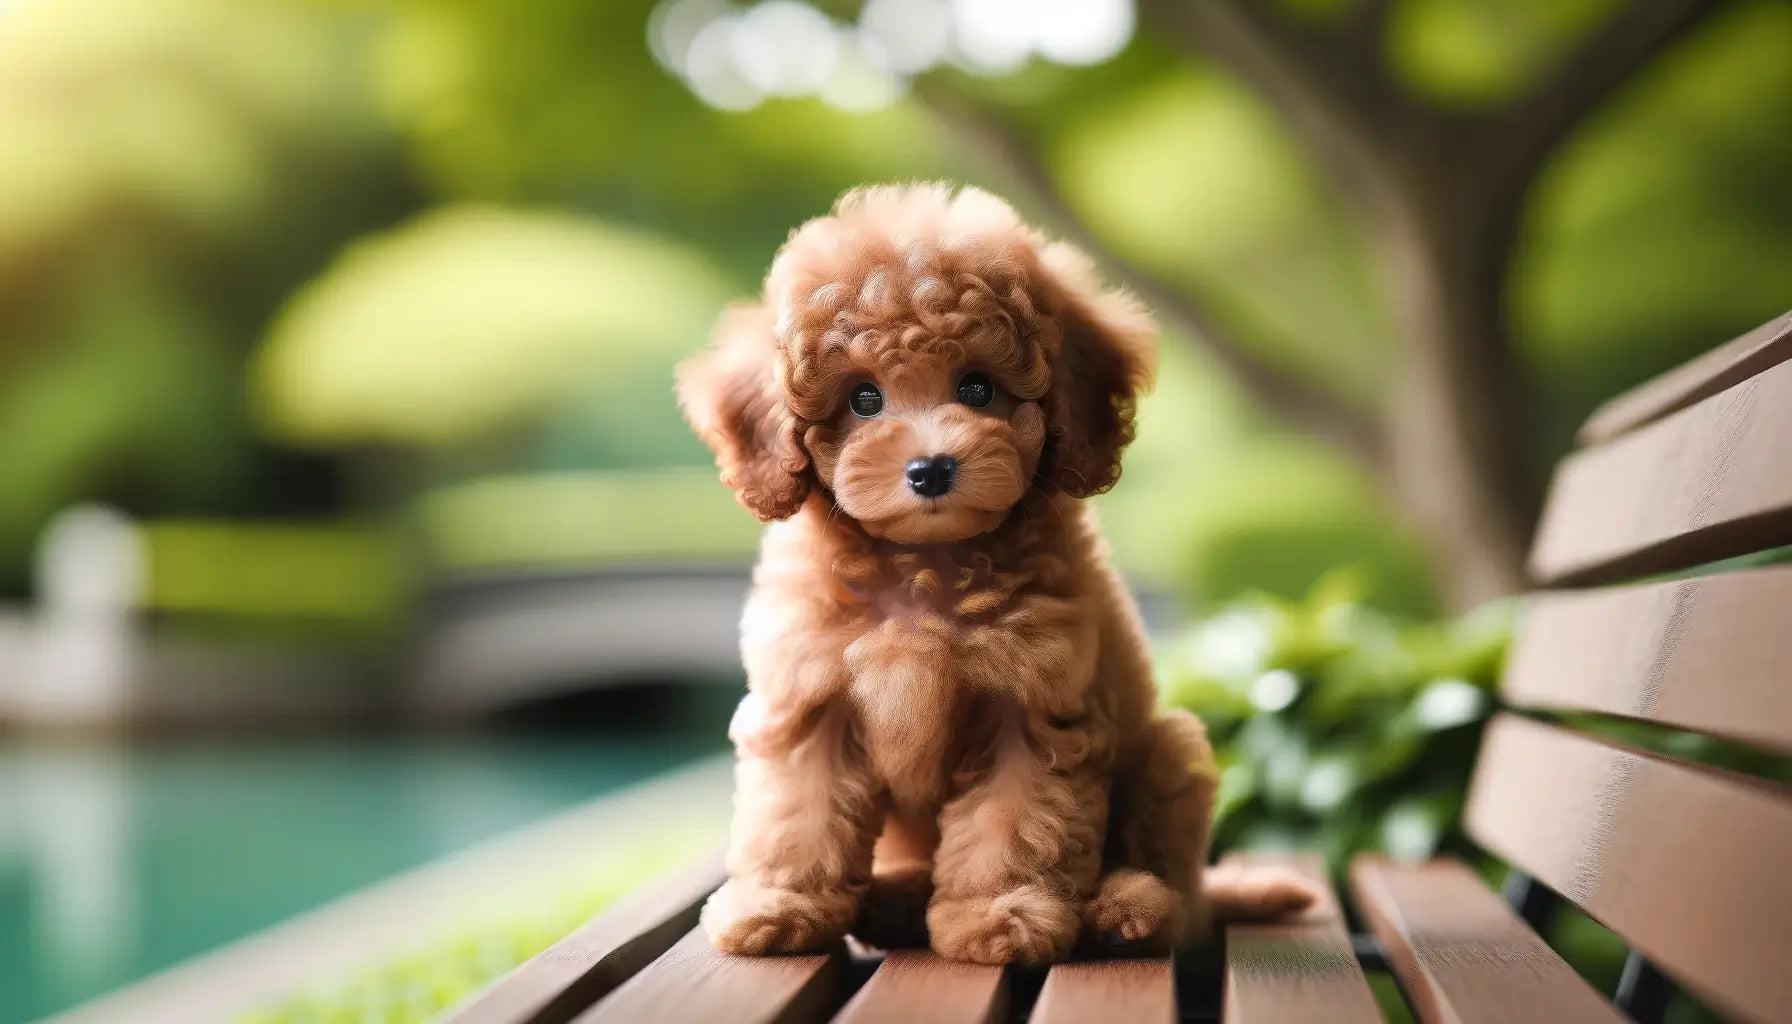 A brown Poodle puppy sitting on a bench, looking soft and fluffy.